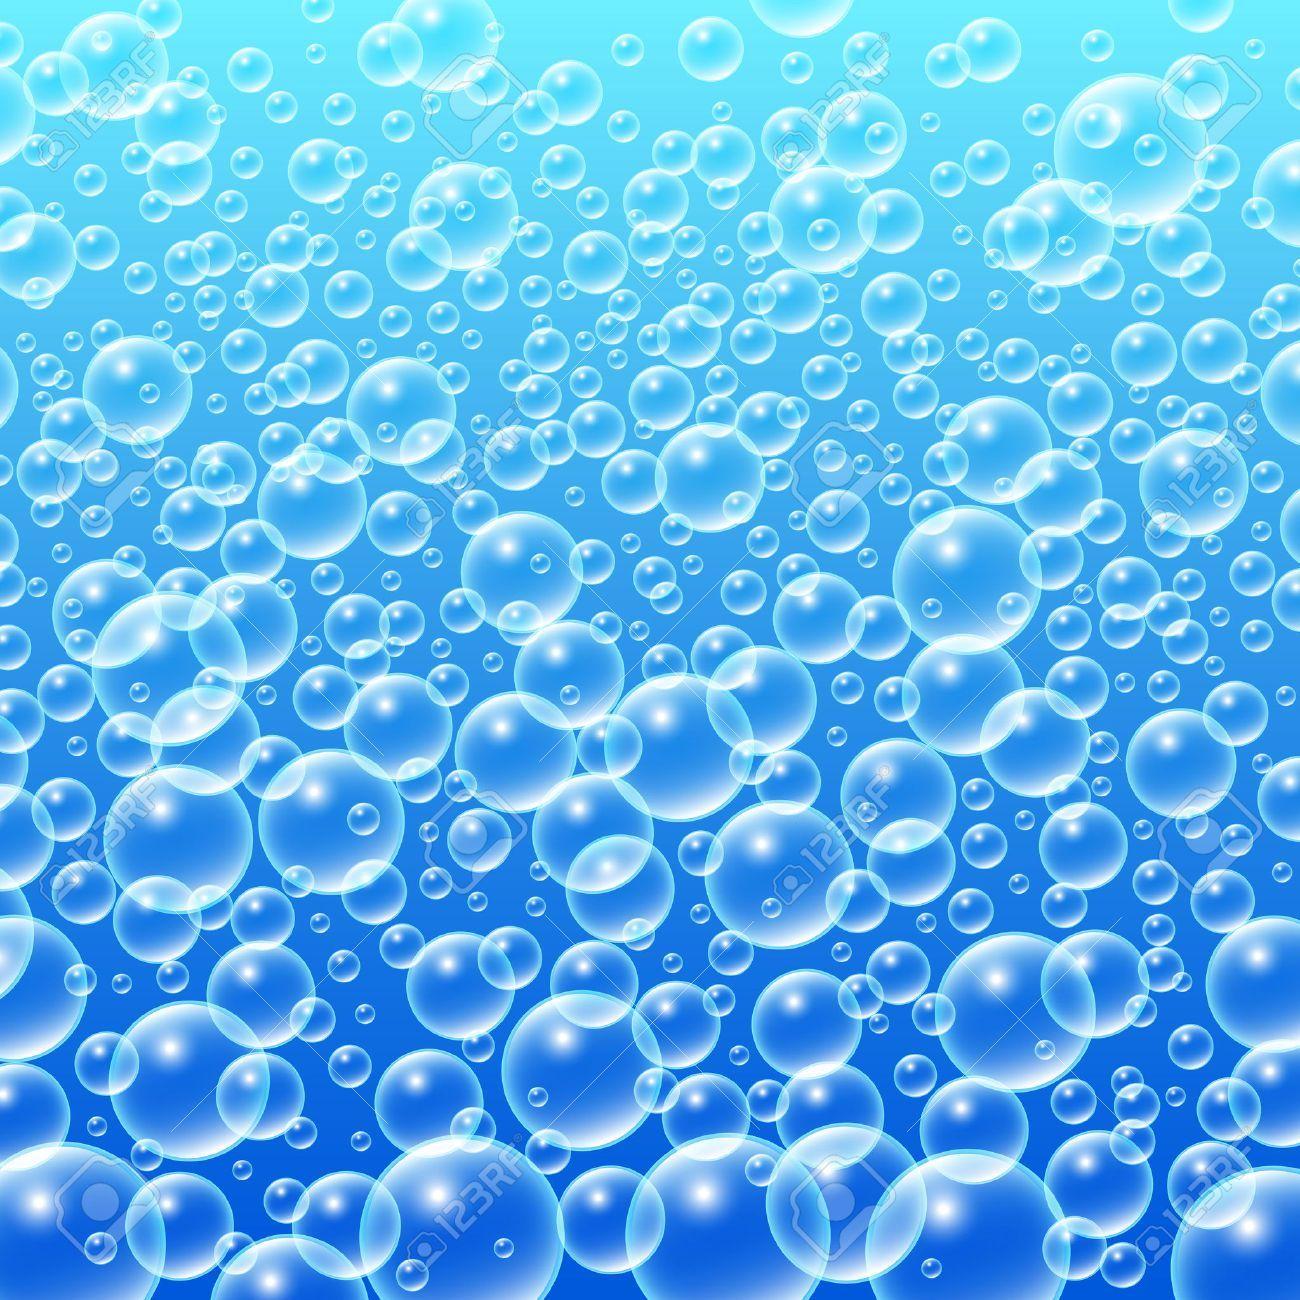 30150787 Colourful Blue Water Bubbles Background Vector Illustration